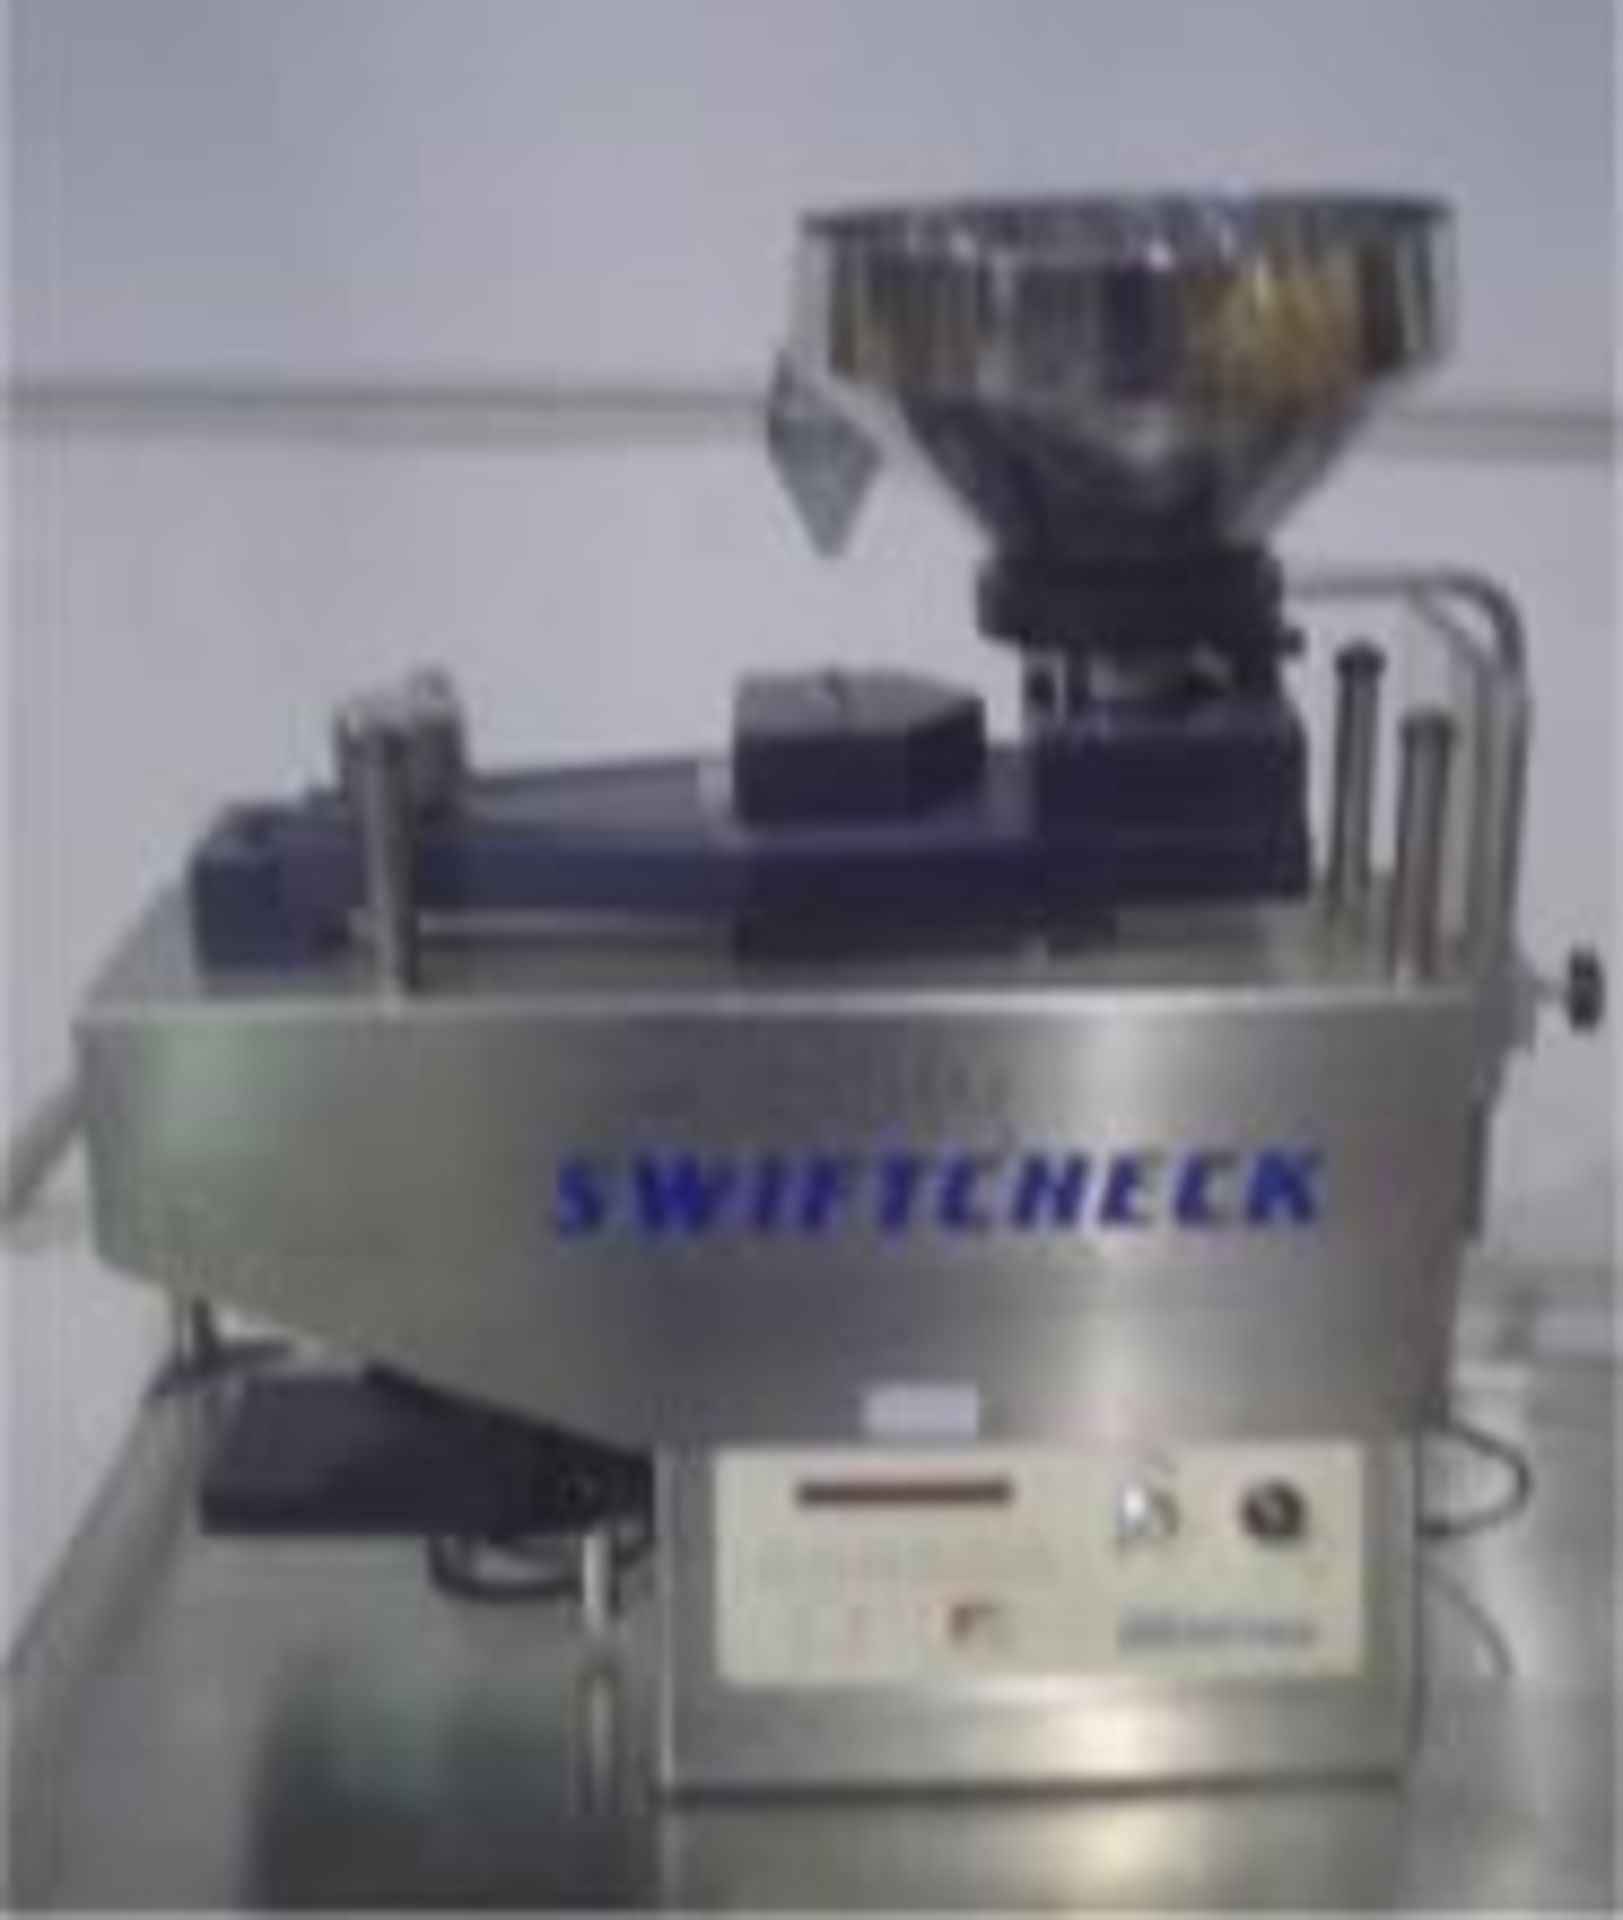 Used SwiftCheck Tablet-Capsule Counters, Model S-Check. Electrics: 1Ph/60Hz/120V. Load Out Fee:100